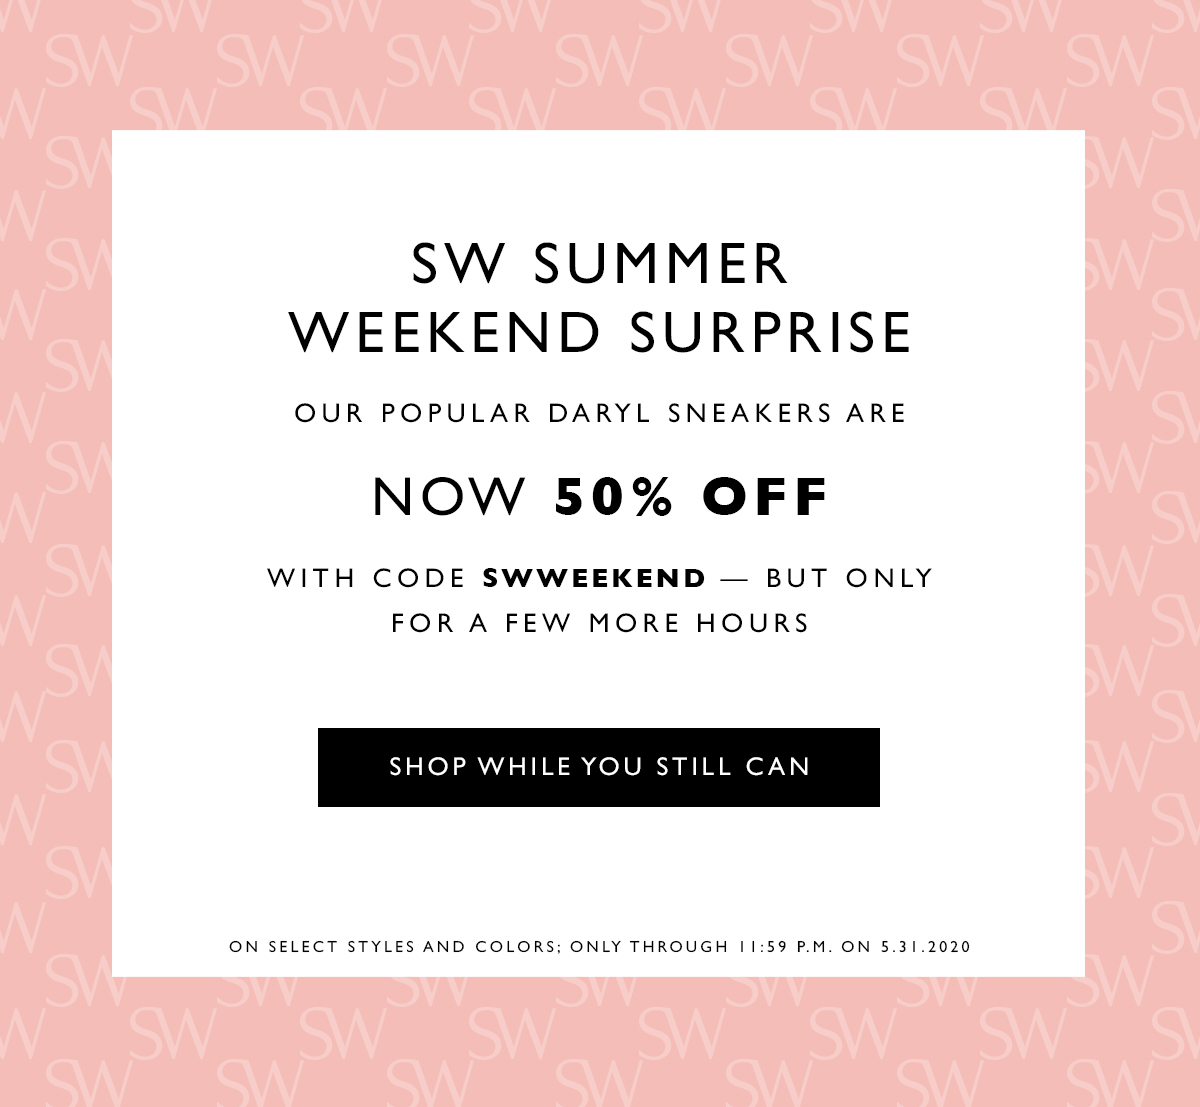 SW Summer Weekend Surprise. Our popular DARYL sneakers are now 50% off with code SWWEEKEND — but only for a few more hours. SHOP WHILE YOU STILL CAN. On select styles and colors; only through 11:59 P.M. on 5.31.2020 